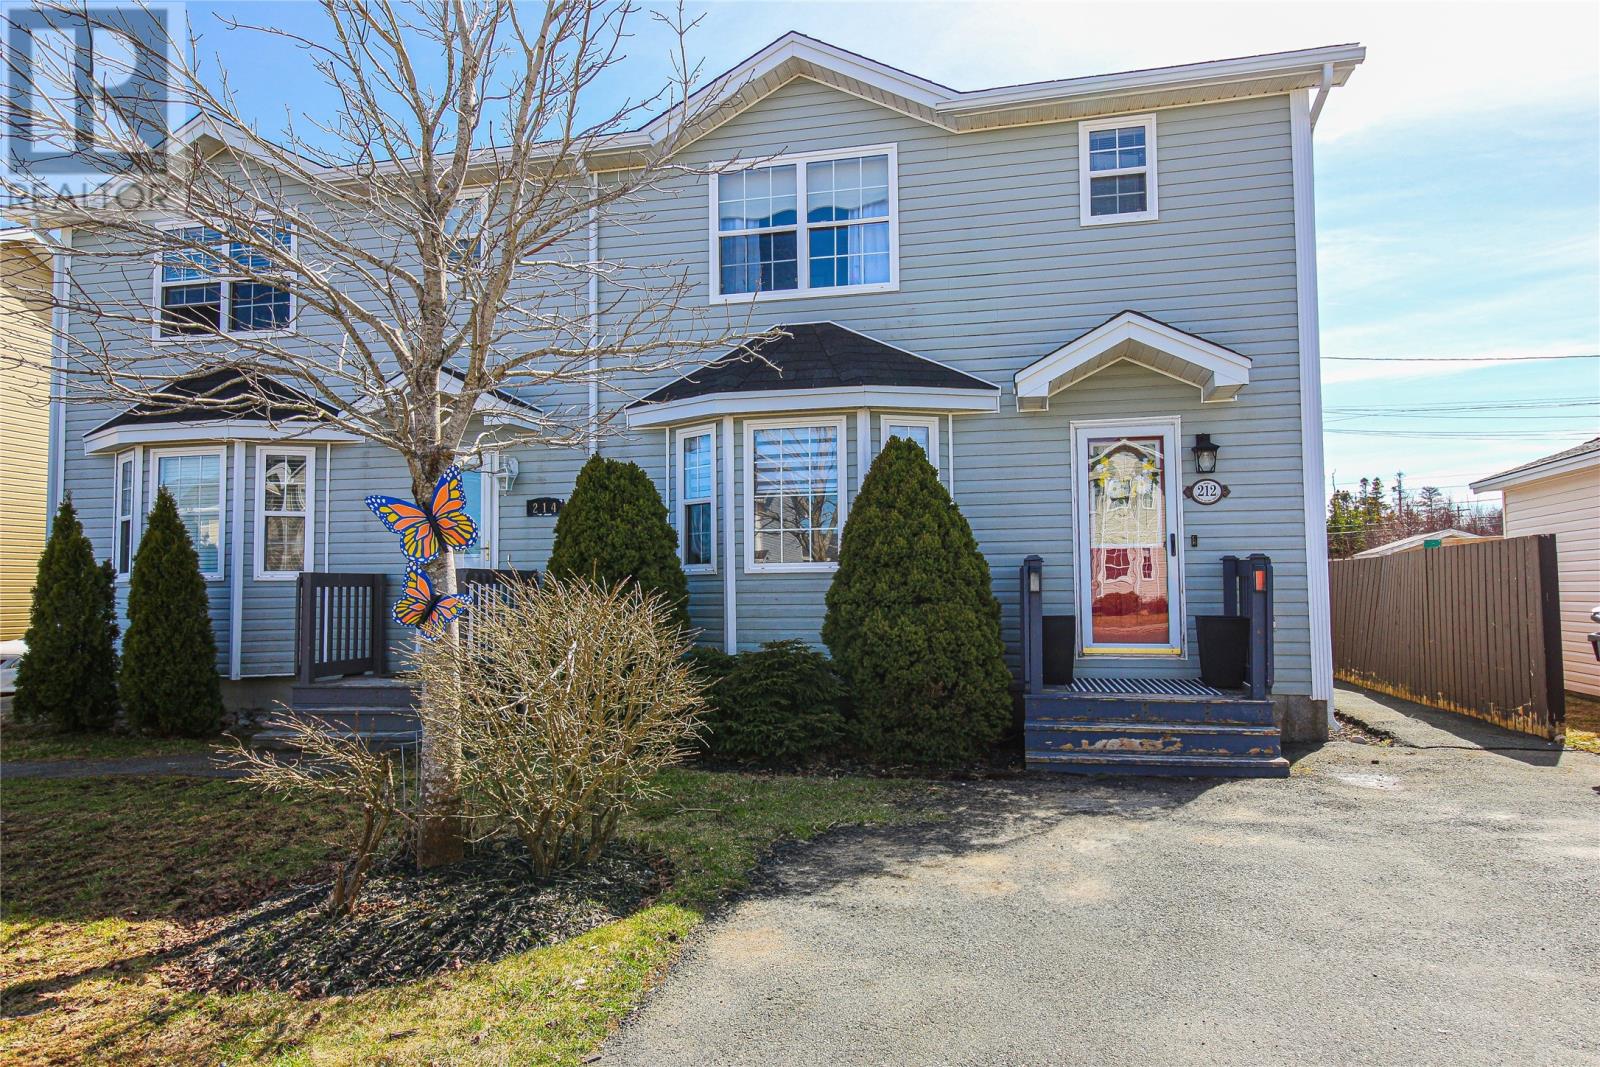 212 Green Acre Drive, St. John's, A1H1C1, 3 Bedrooms Bedrooms, ,3 BathroomsBathrooms,Single Family,For sale,Green Acre,1270057